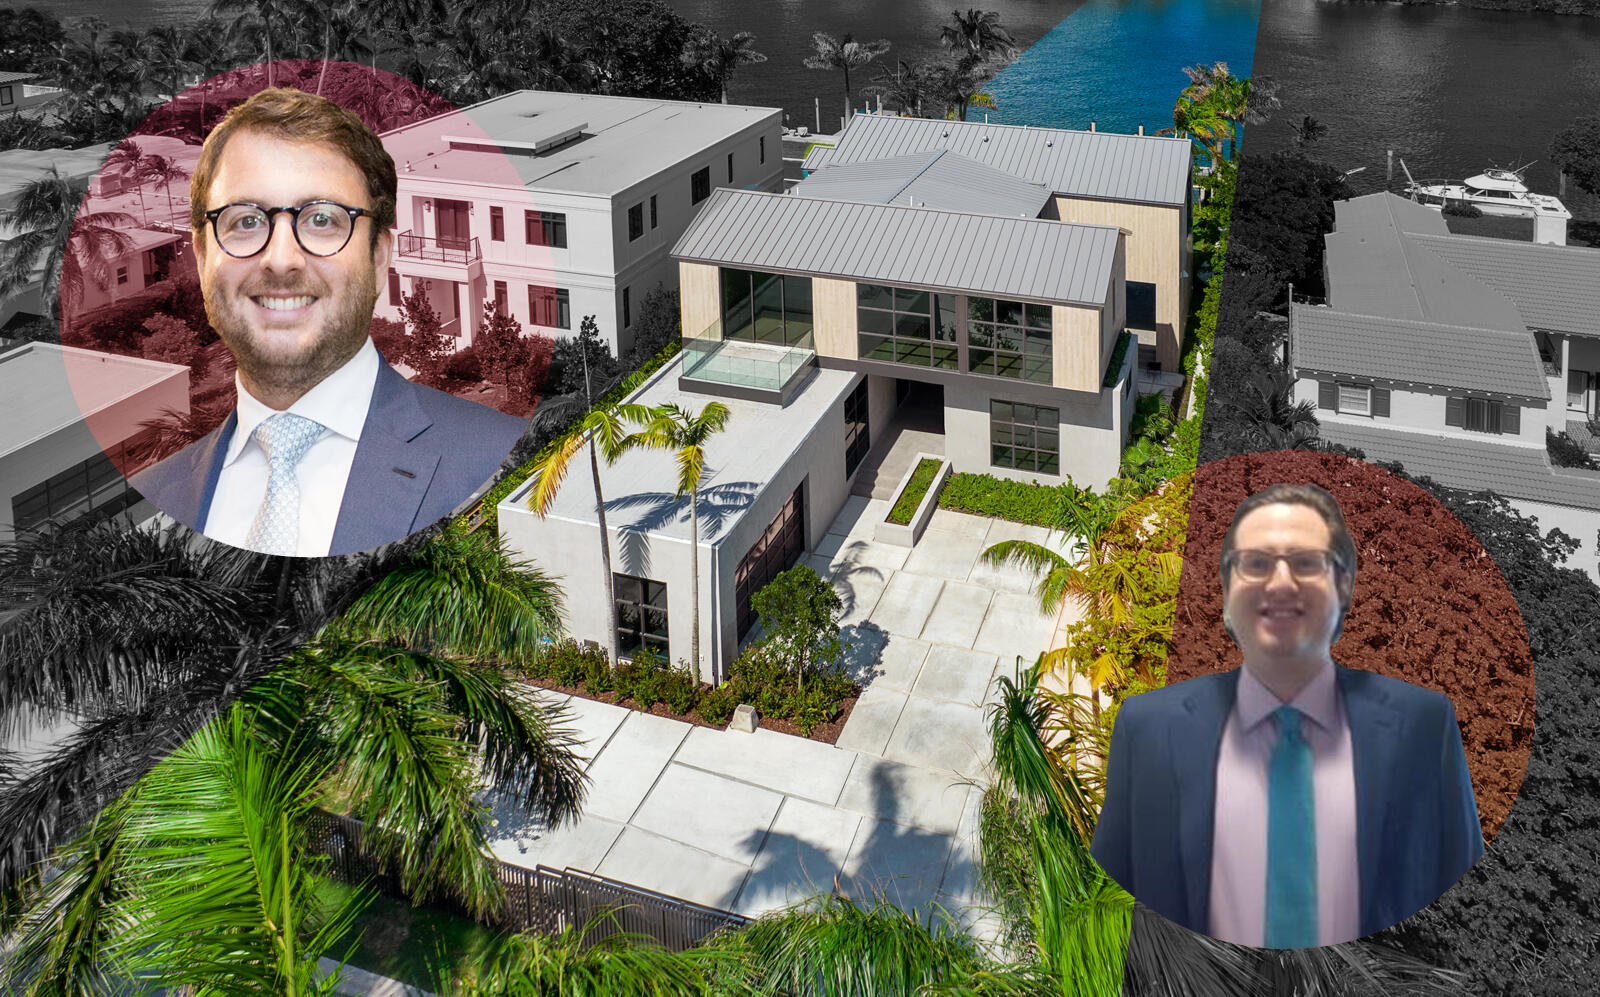 The Allison Island spec home with James Curnin and Adam Wyden (LPG, Columbia Business School)